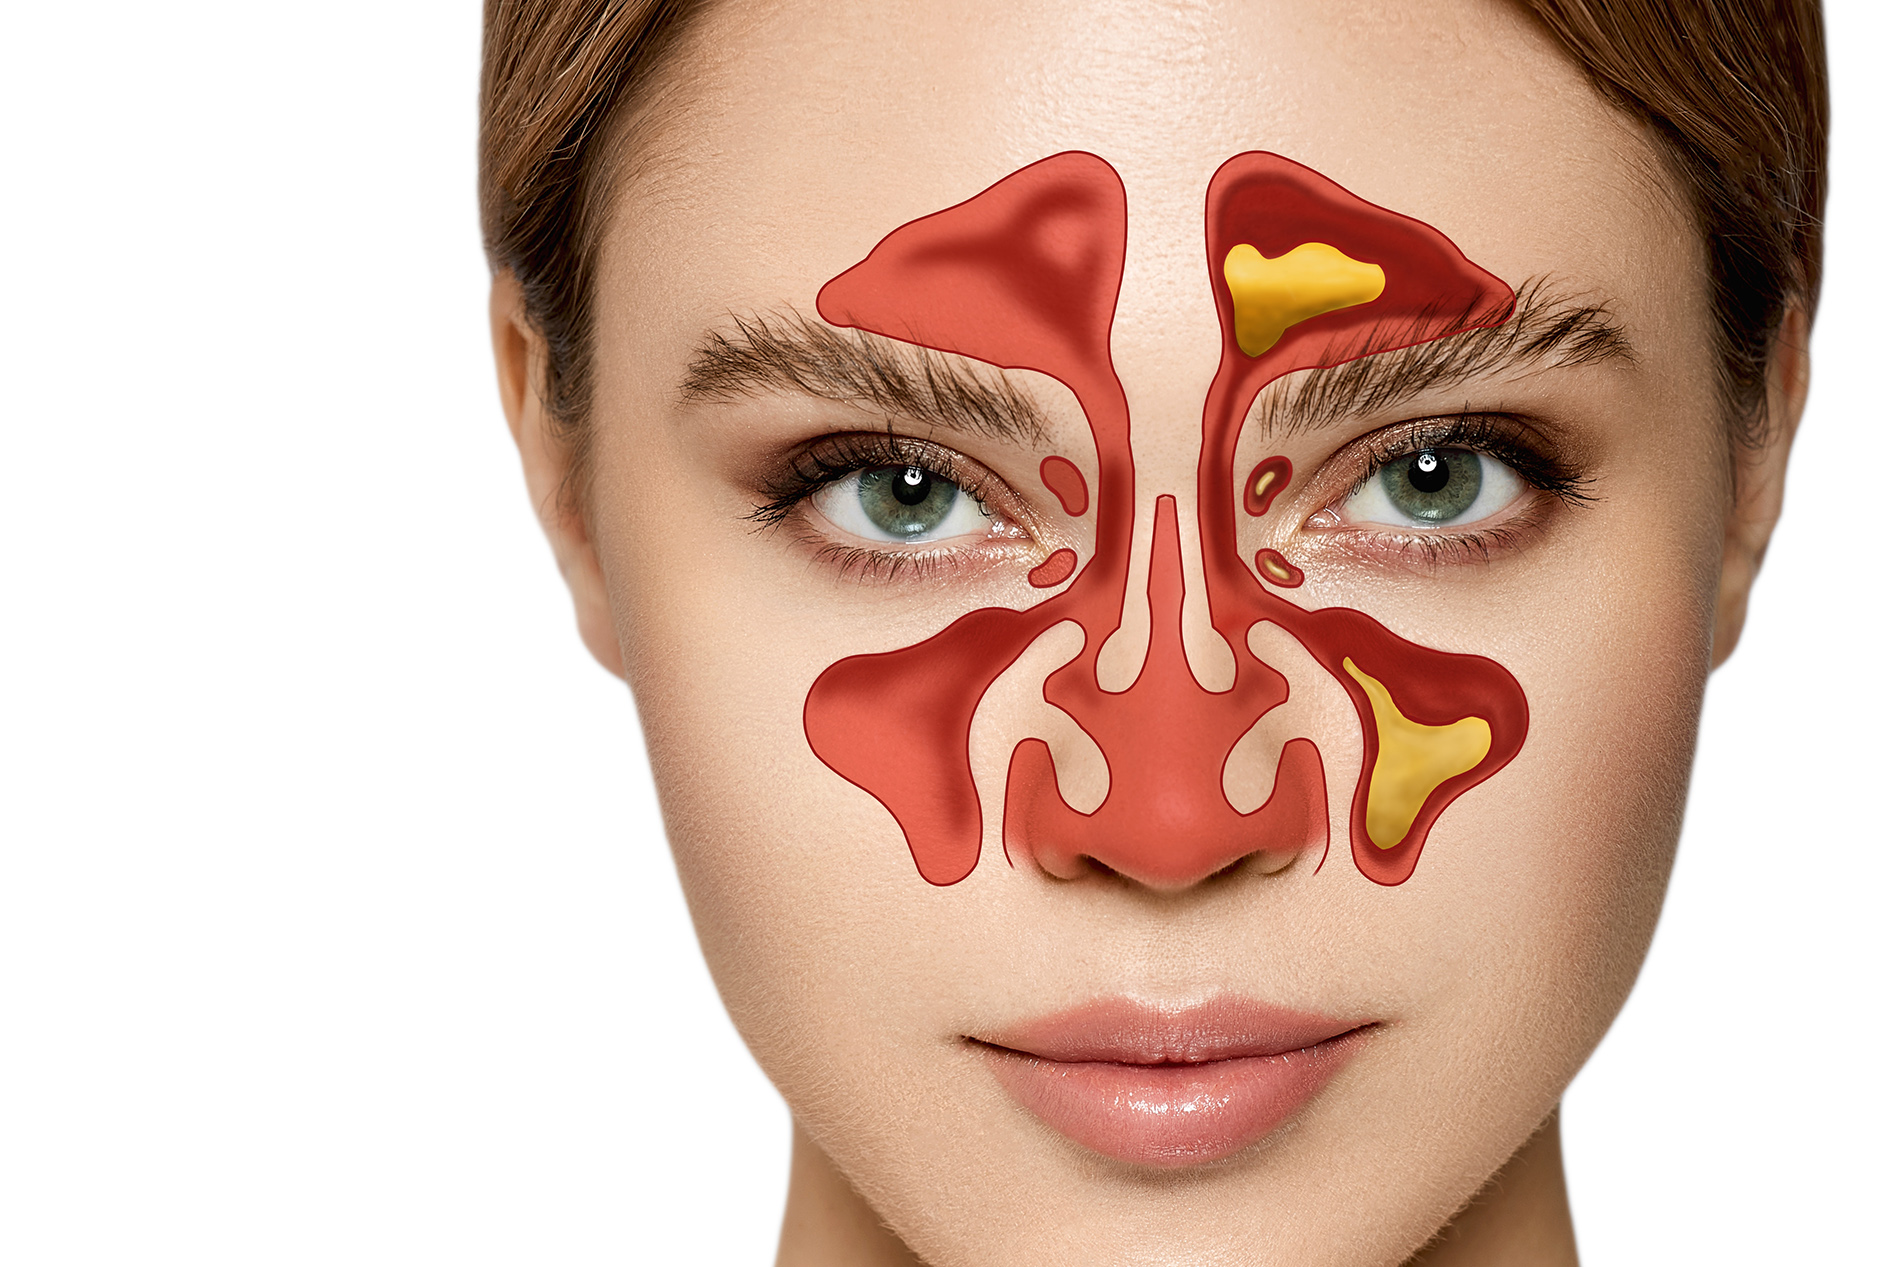 Photo of beautiful woman with medical illustration of her sinus cavities